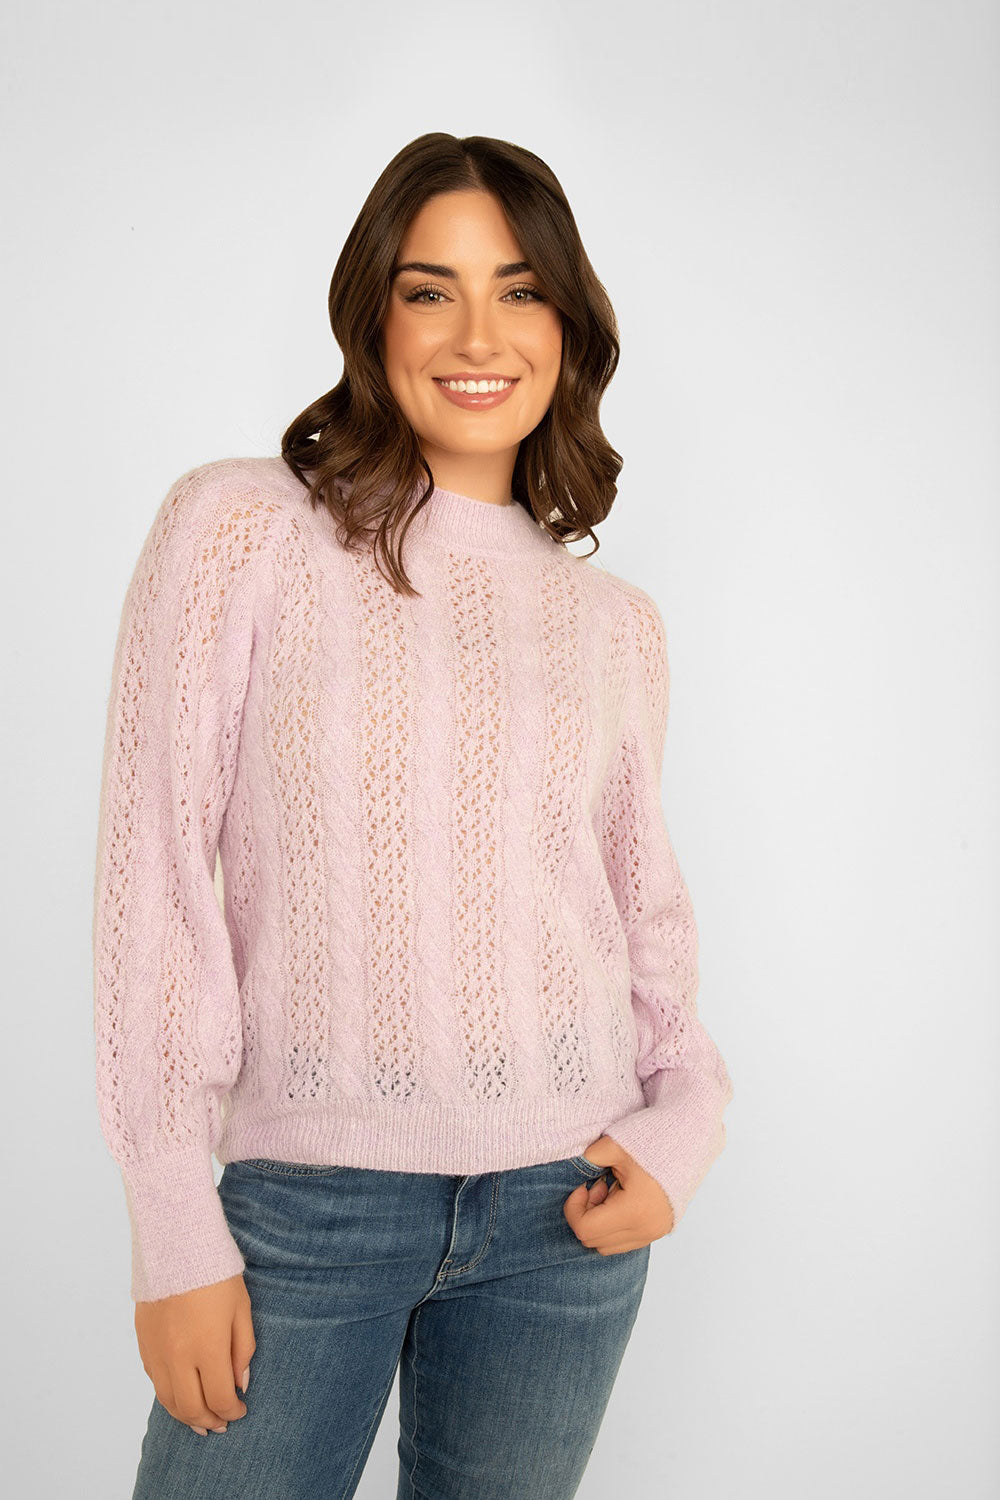 Women's Clothing ESQUALO (F2331500) Lightweight Cable Knit Sweater in LILAC